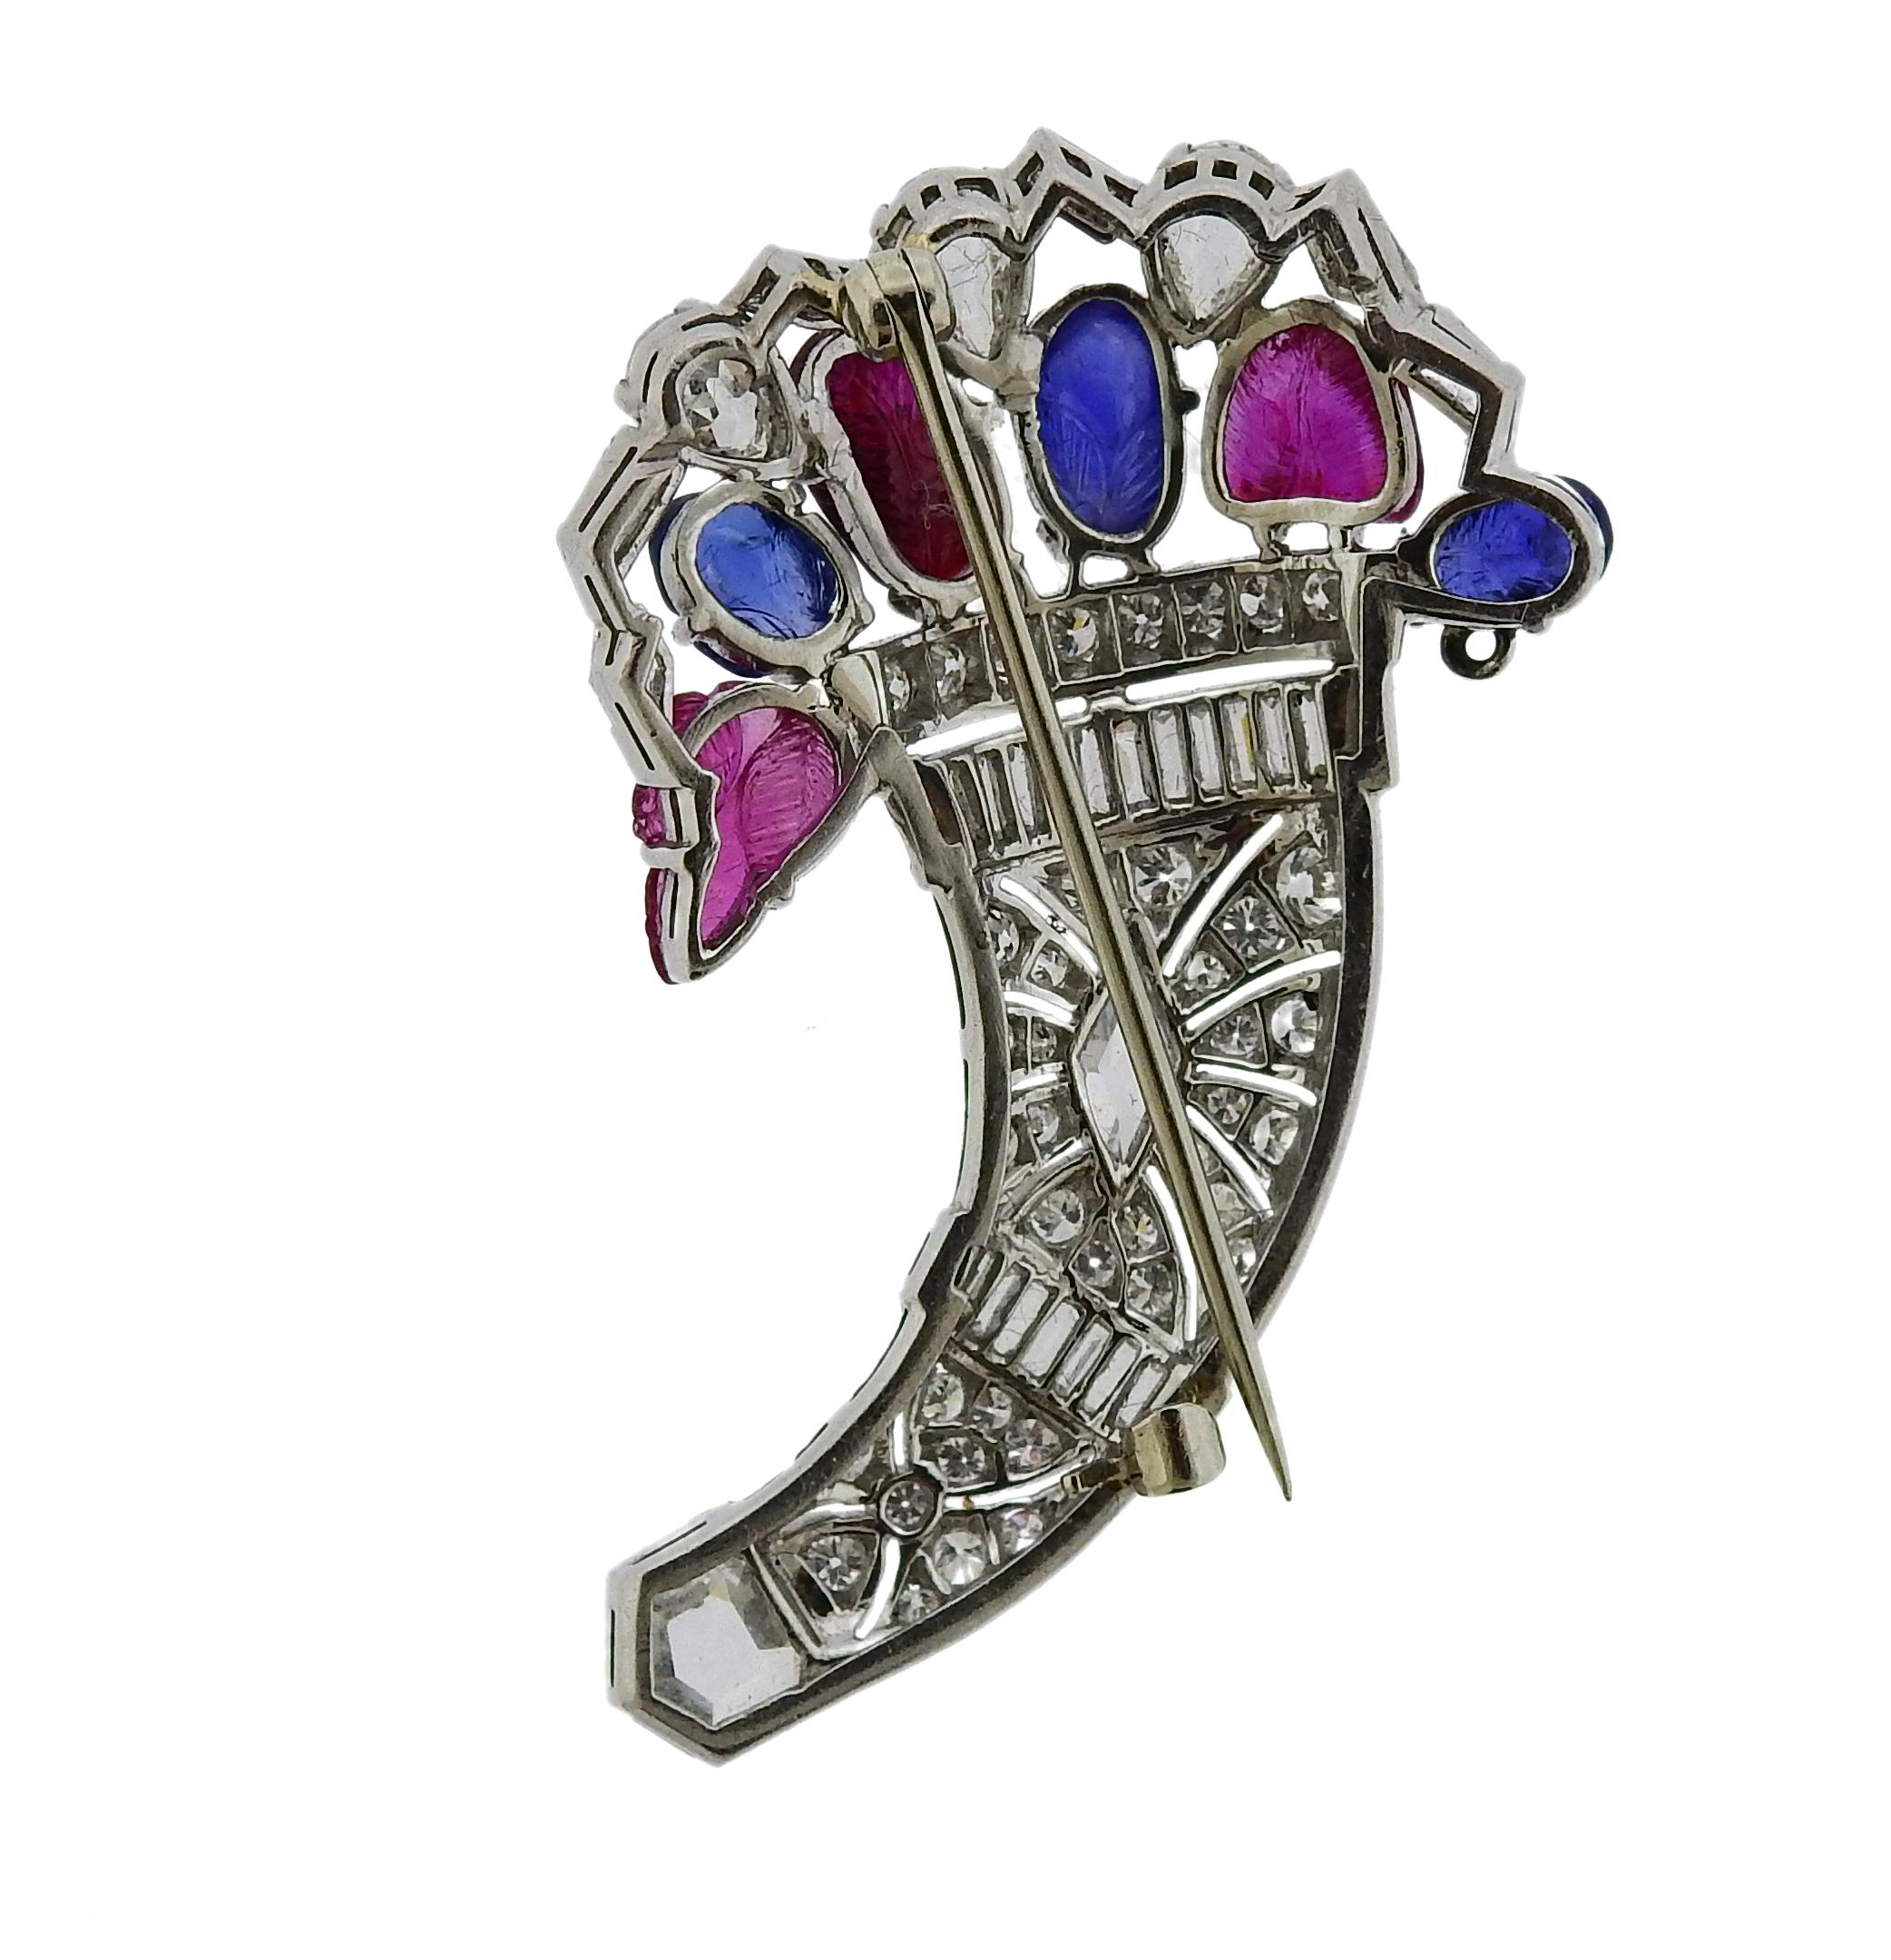 Platinum tutti frutti basket brooch pin, set with carved rubies and sapphires, surrounded with a total of approx. 3.60ctw in diamonds. Brooch is 46mm x 28mm. Weight is 12.2 grams. Marked: Plat.